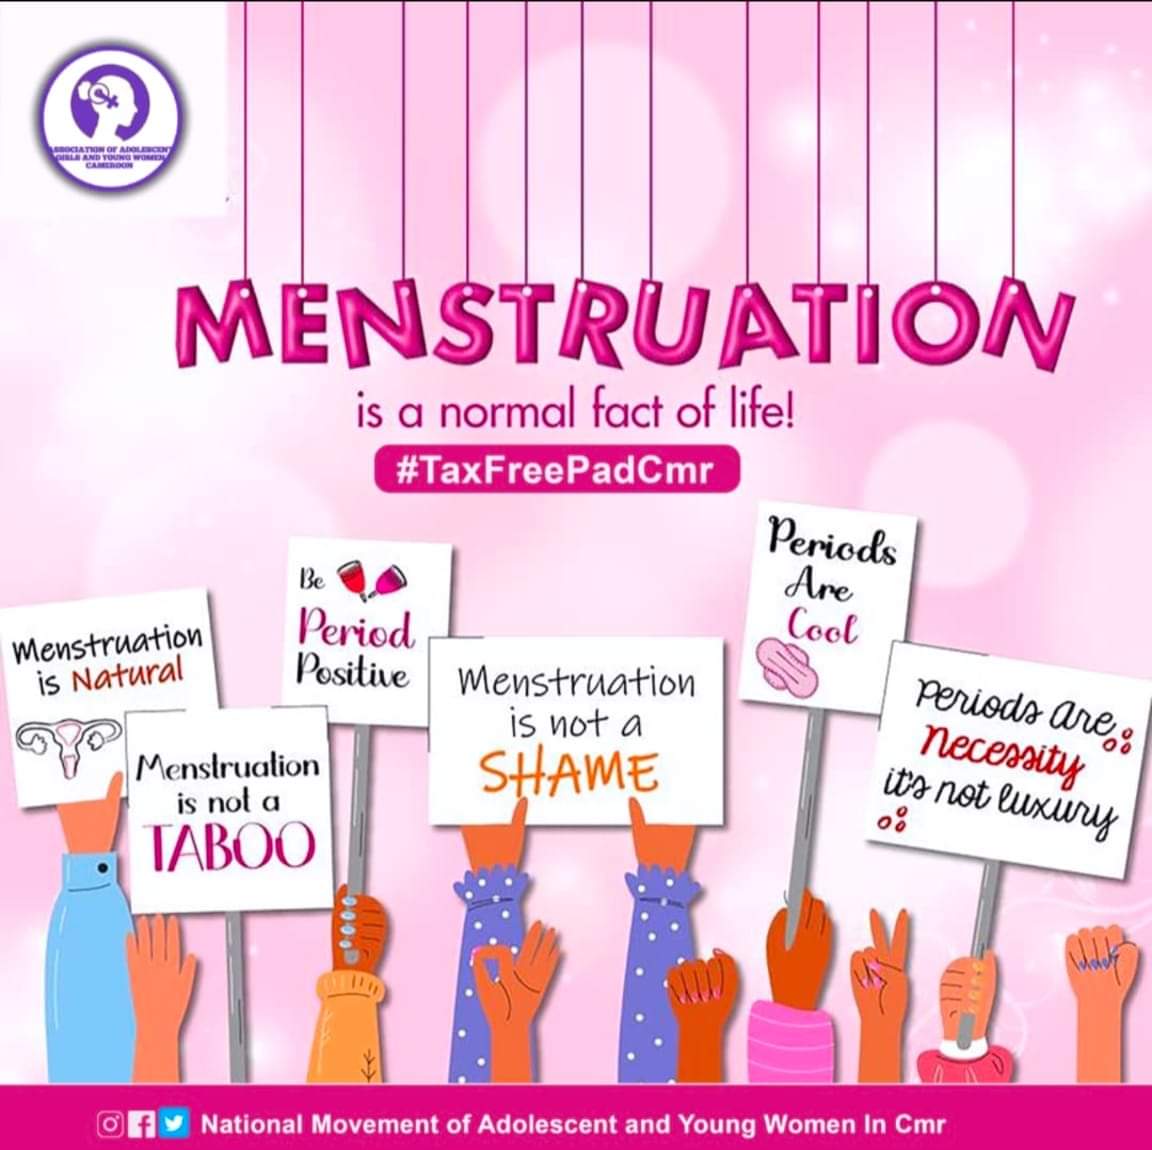 We keep echoing our voices to say Menstruation 🩸 is a normal fact of Life. #Stopthestigma

#taxfreepadcmr
#dontatxmyperiod
#agywcmr
#periodpoverty